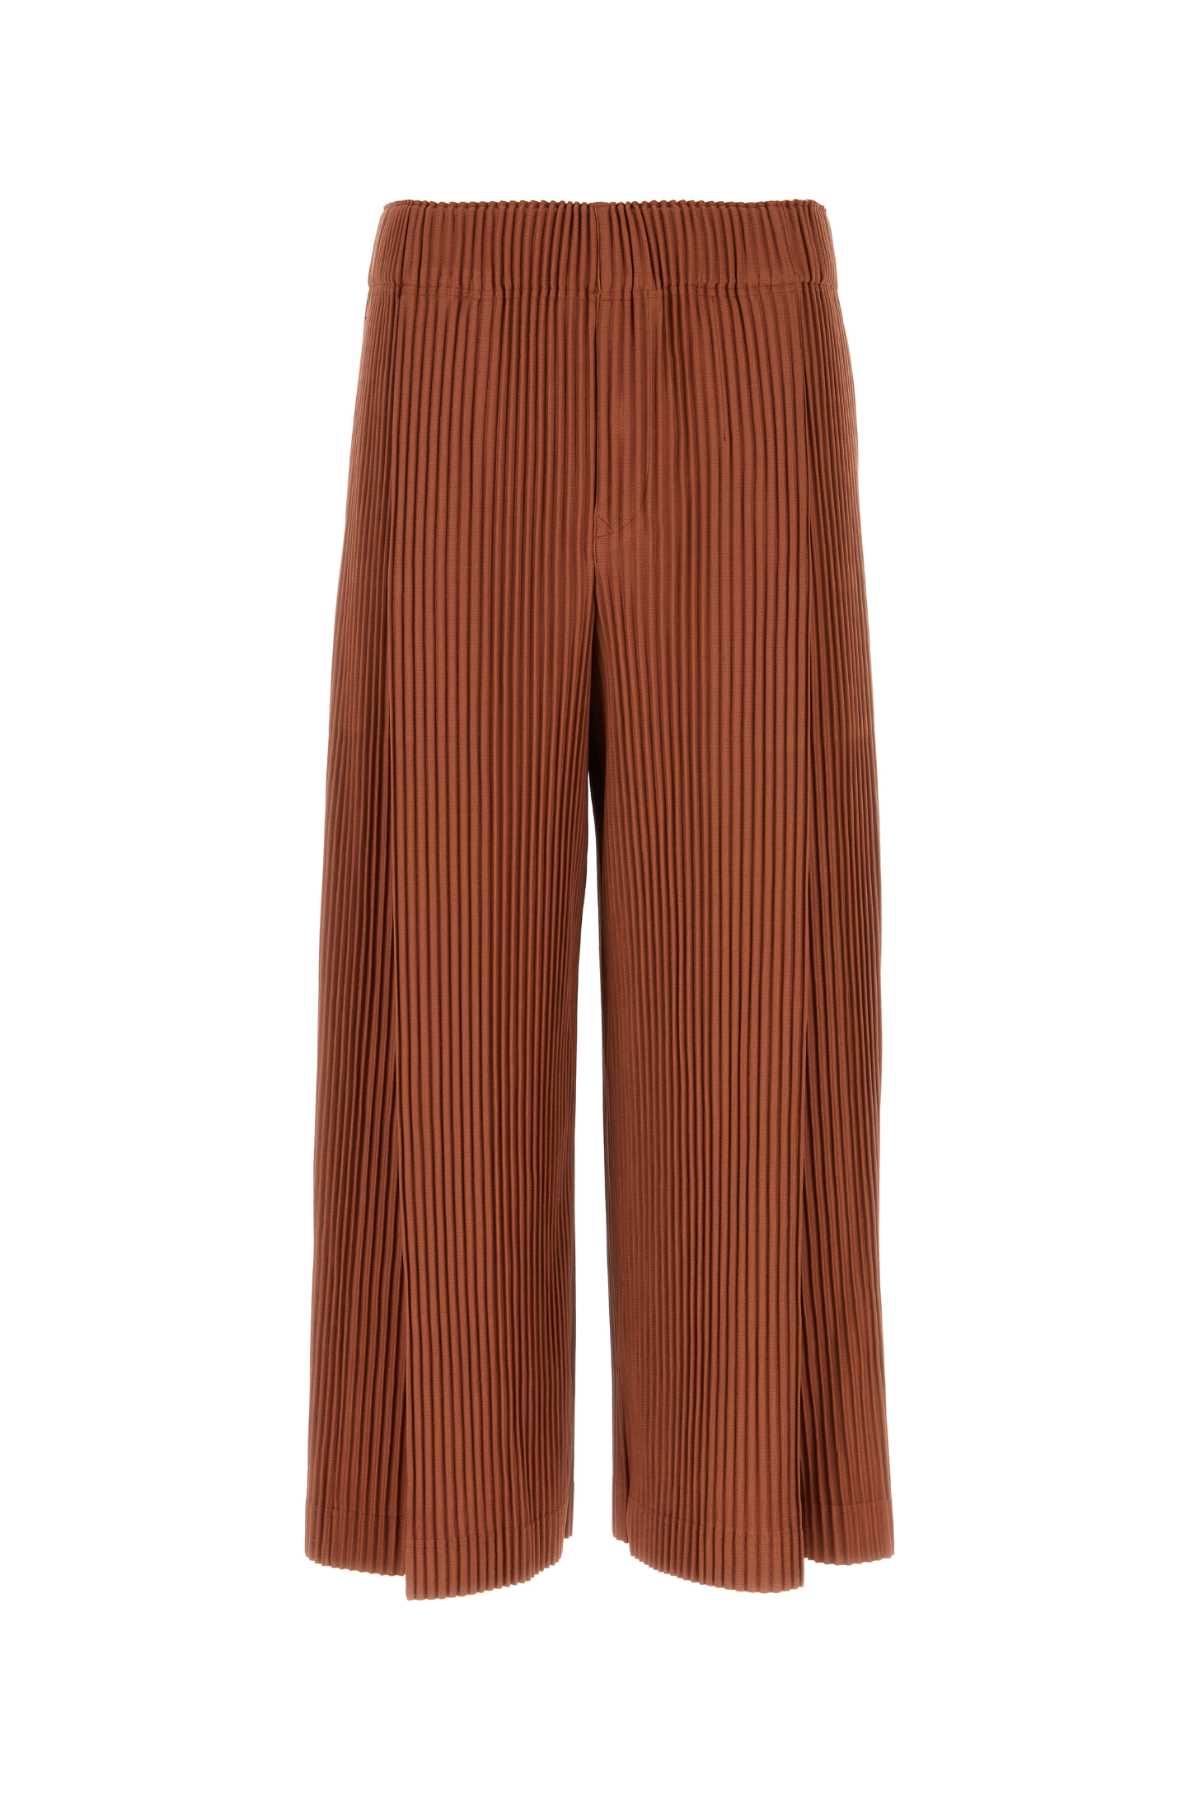 Homme Plissé Issey Miyake Copper Polyester Wide-leg Pant